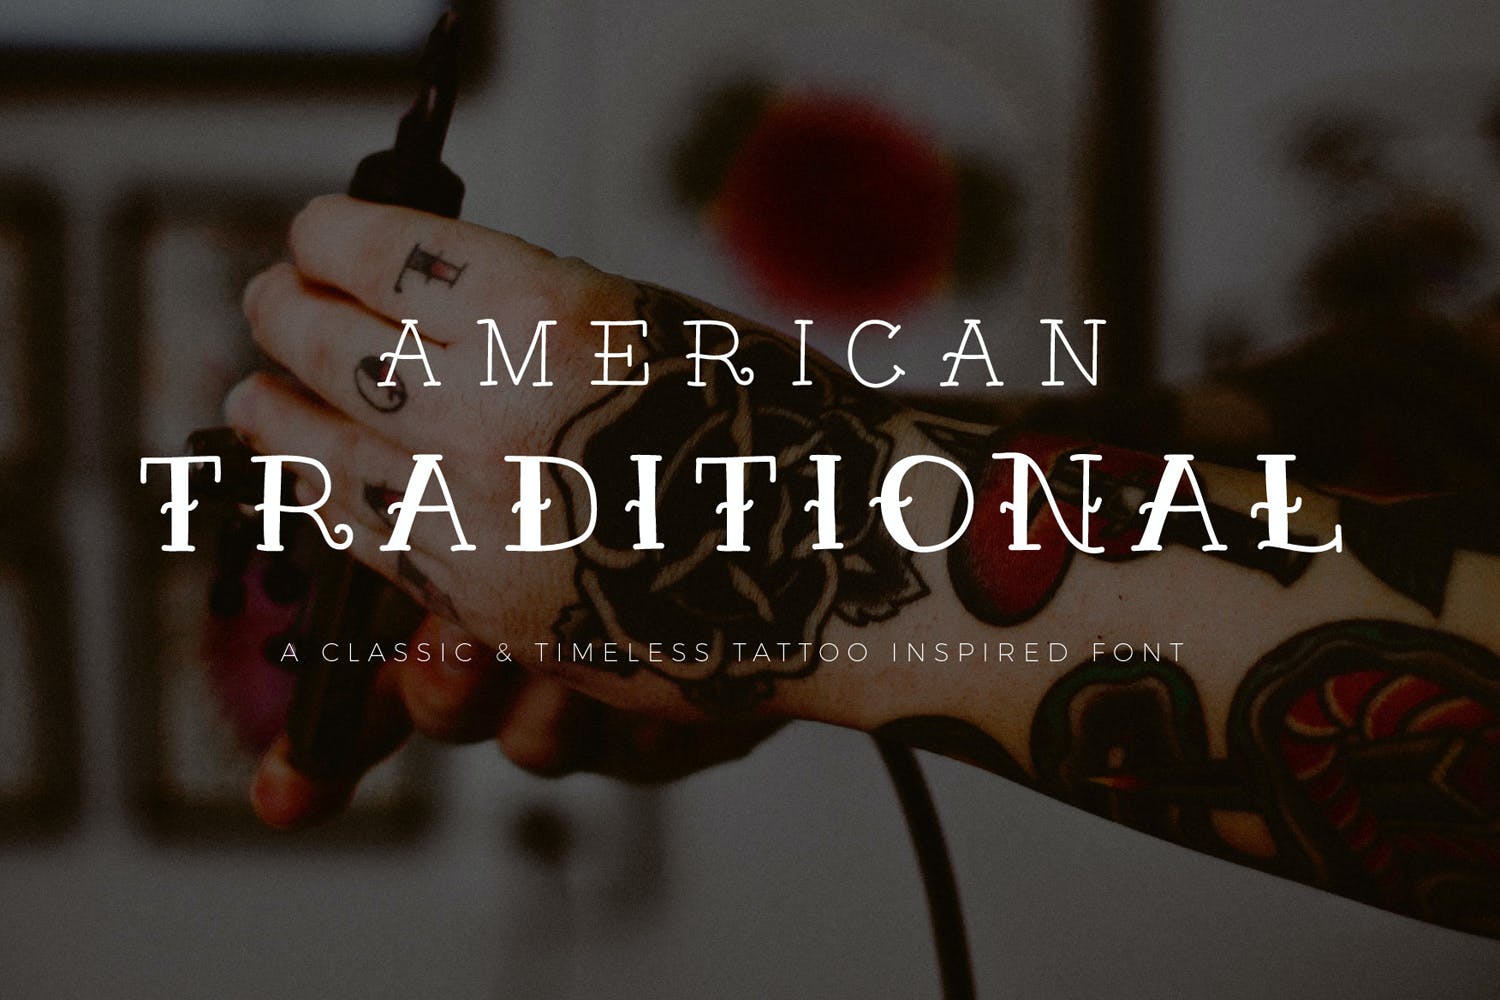 American Traditional - Tattoo Style Font